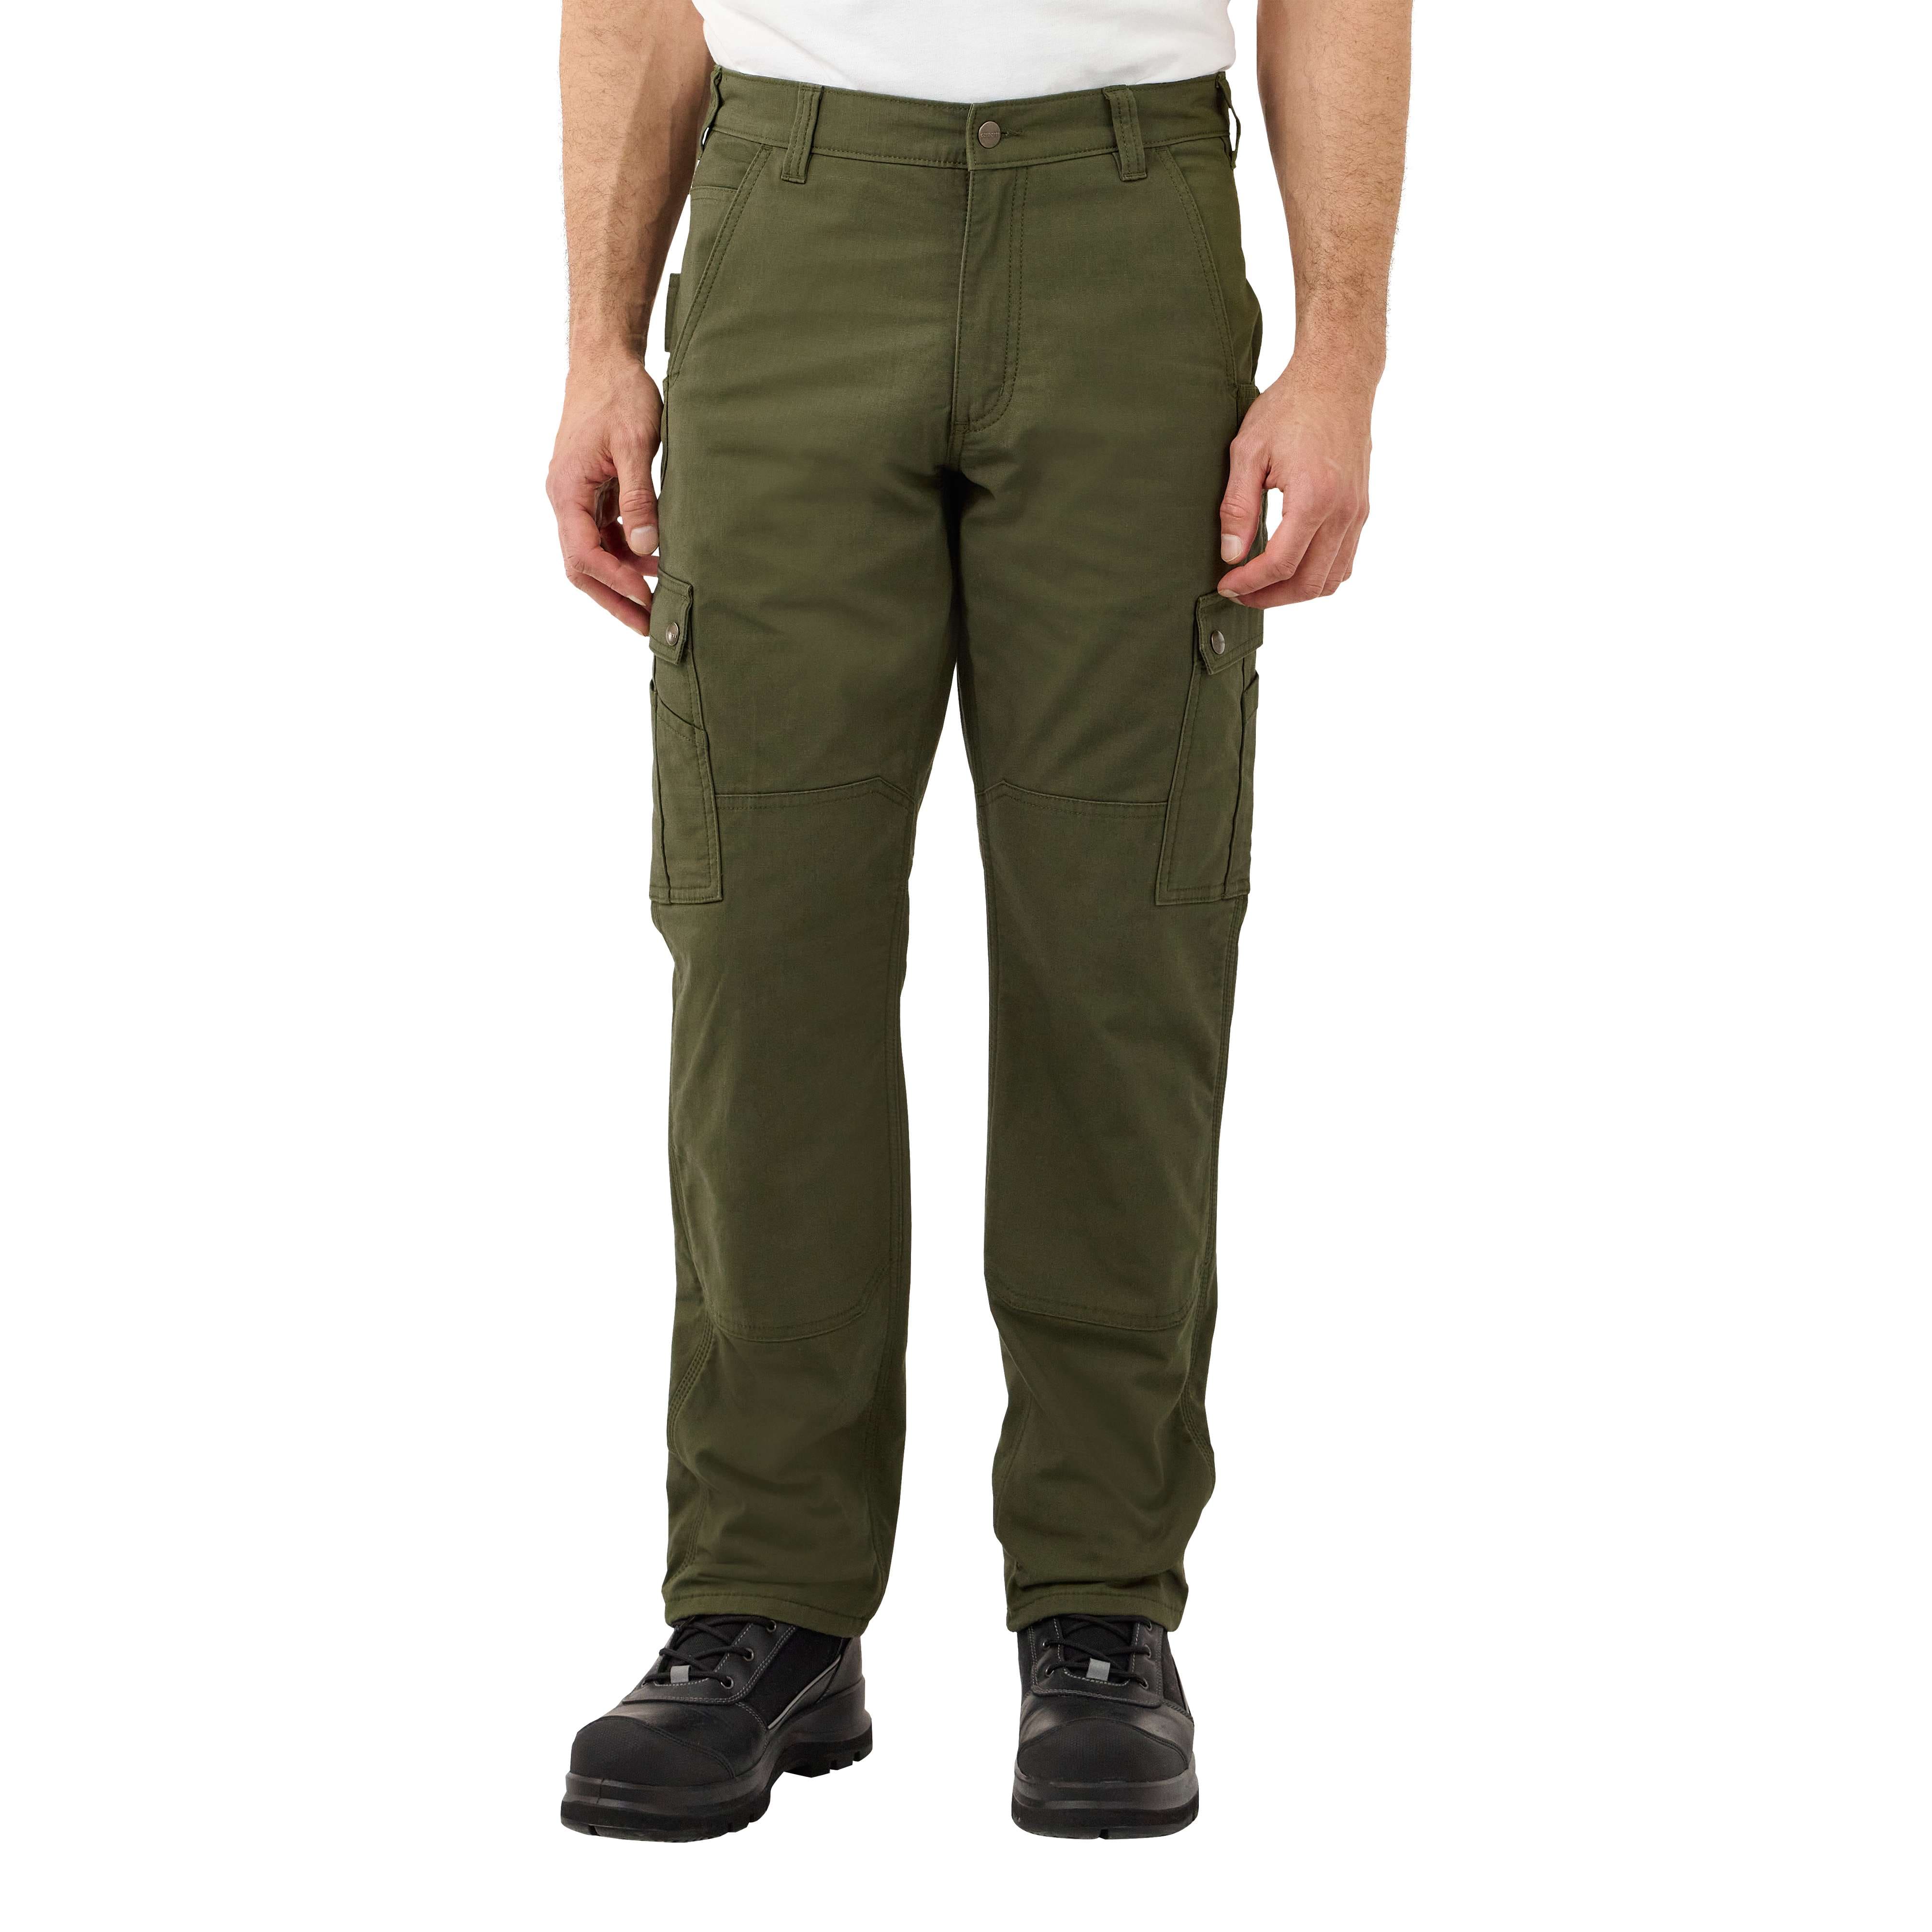 Carhartt Rugged Flex Relaxed-Fit Ripstop Cargo Work Pants for Men